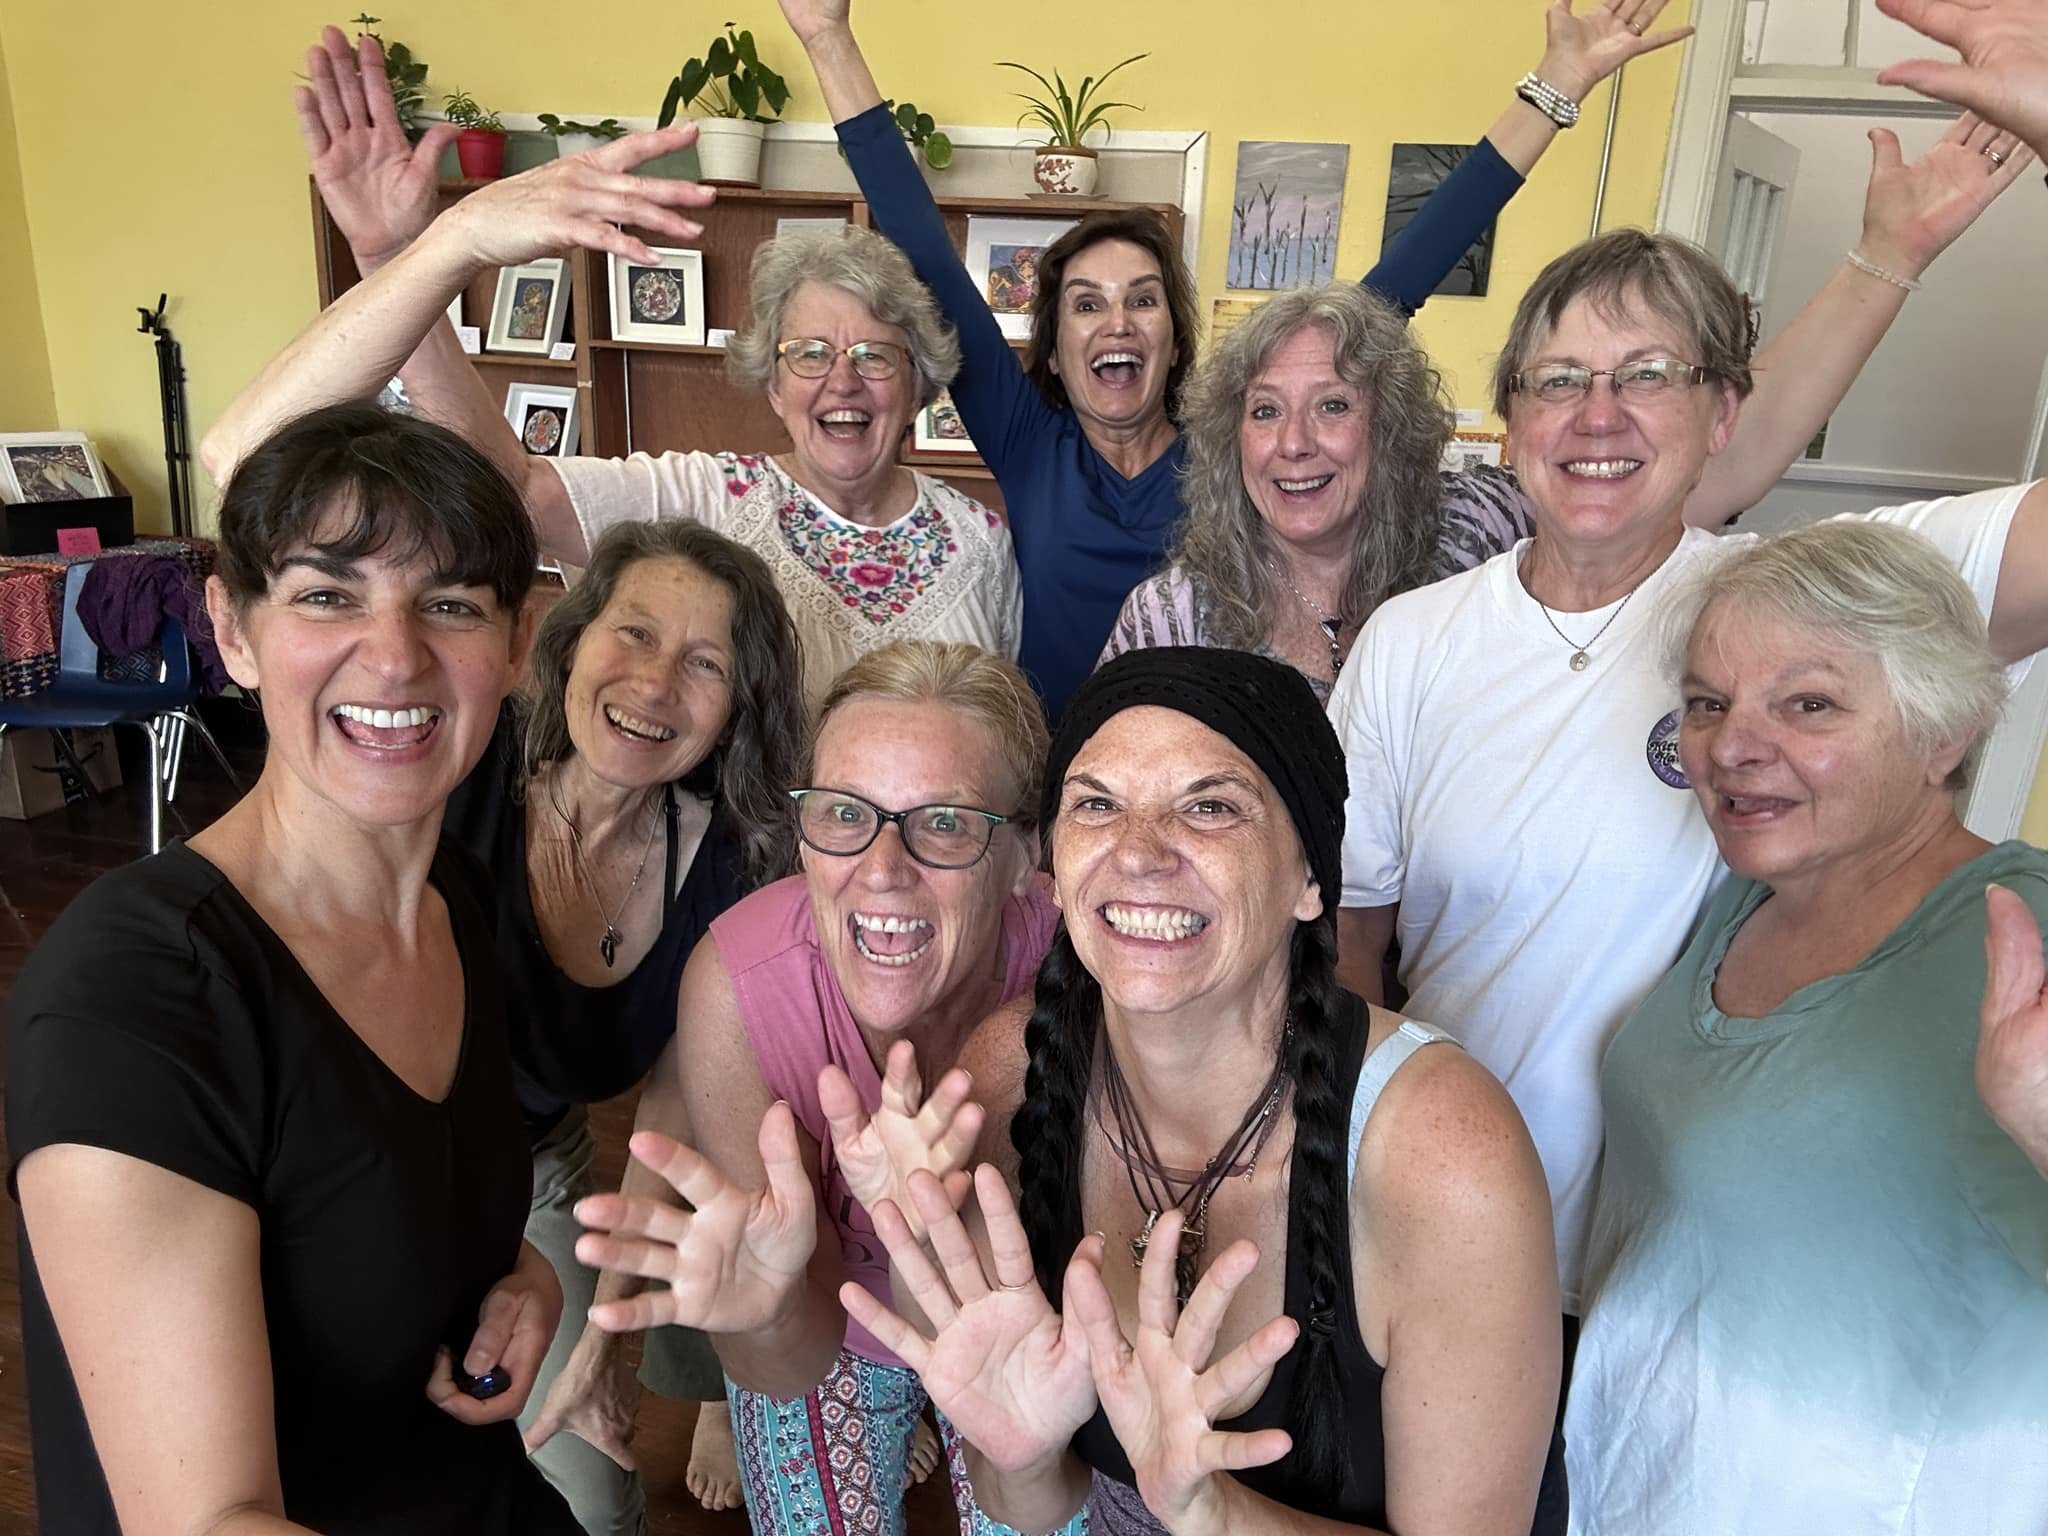 Day 8 - 31 Day Wellness Challenge - So much fun to &ldquo;play&rdquo; Qigong with beautiful light beings. Mental Fitness, Resilience, Joy and Wellbeing all in one, and lots more &hellip; 🙌 Bravo, pollinator sisters! 👩&zwj;❤️&zwj;💋&zwj;👩💓🐝🫶